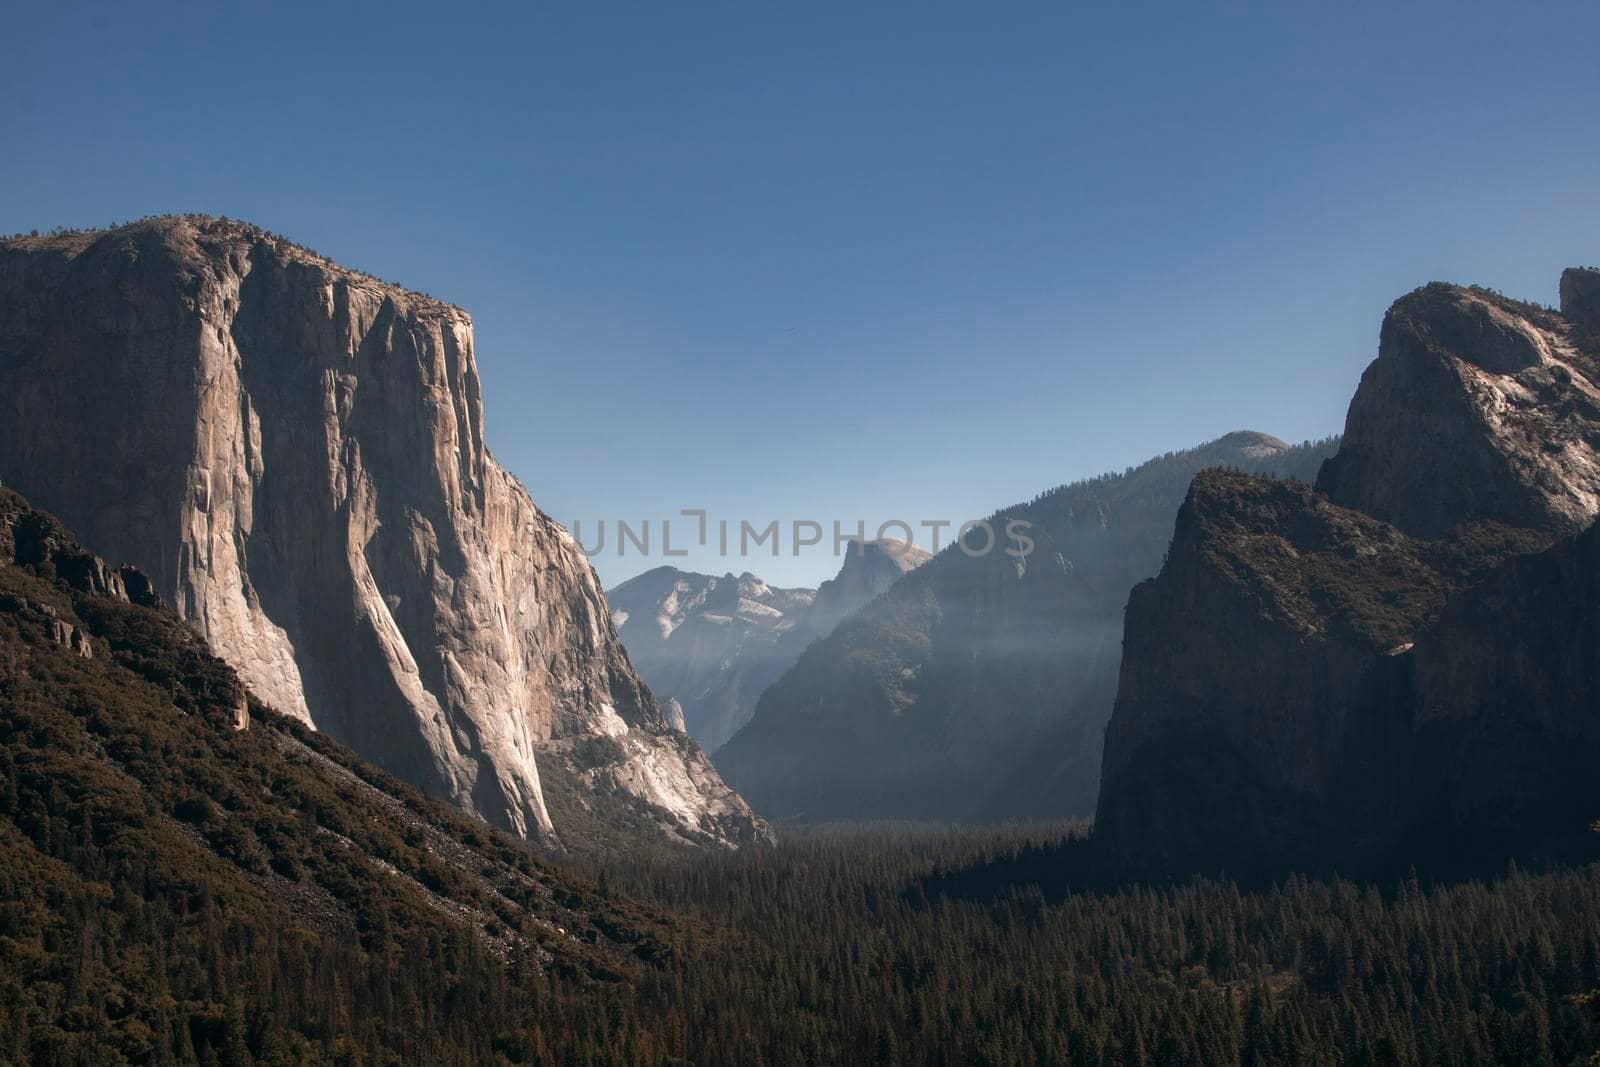 Landscape showing Capitan and others mountains in Yosemite Valley in California